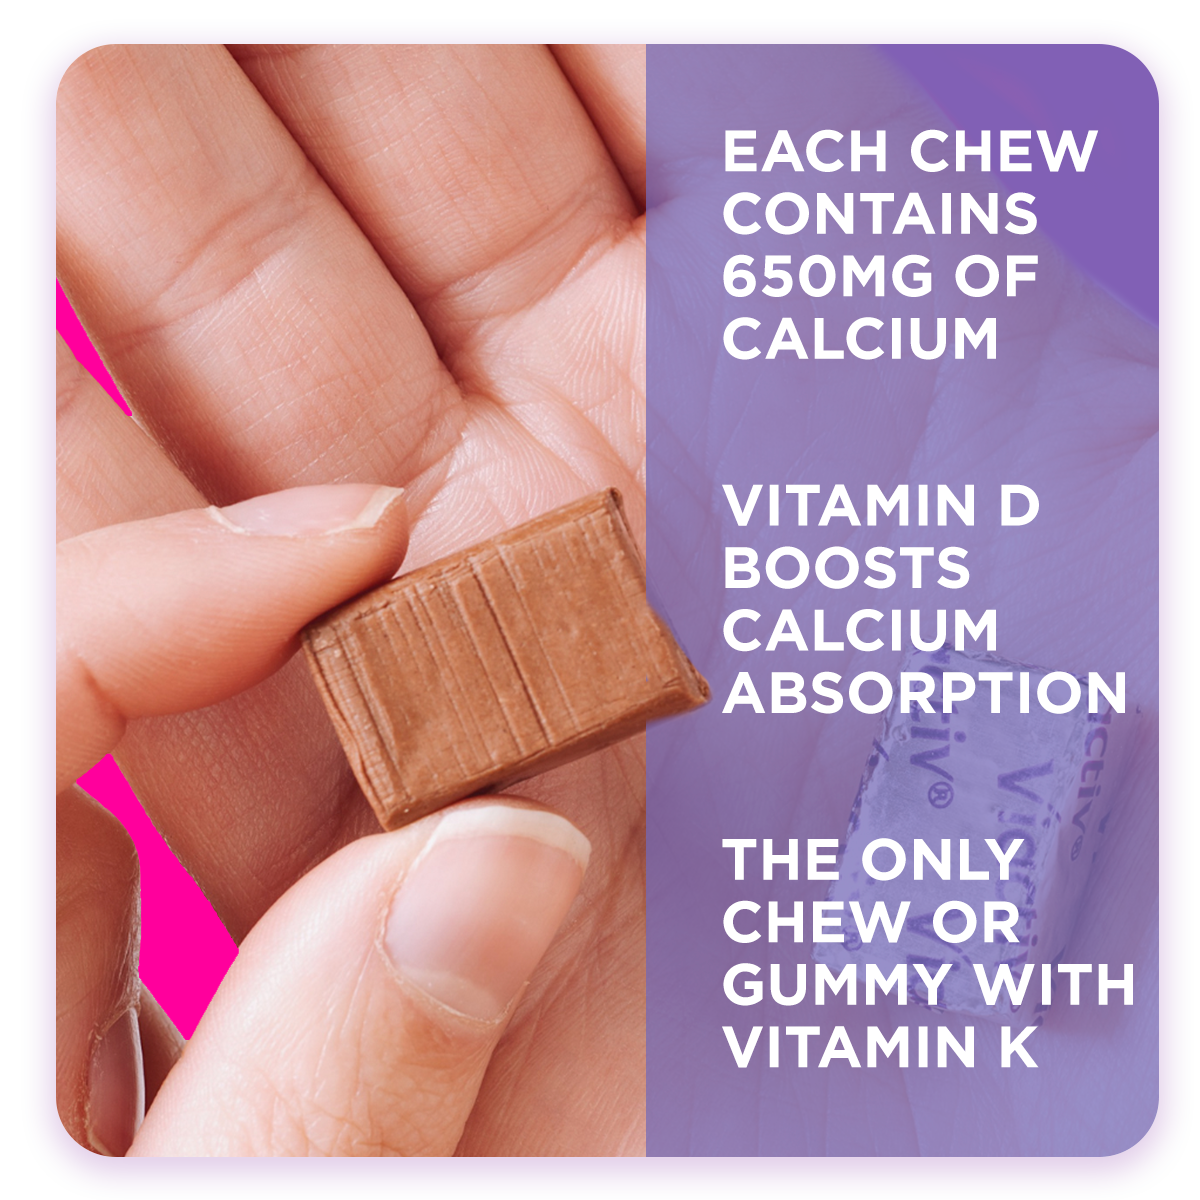 Hand holding Chocolate Calcium chew showing that each chew contains 650mg of Calcium, Vitamin D for Calcium Absorption, and that its the only chew with Vitamin K